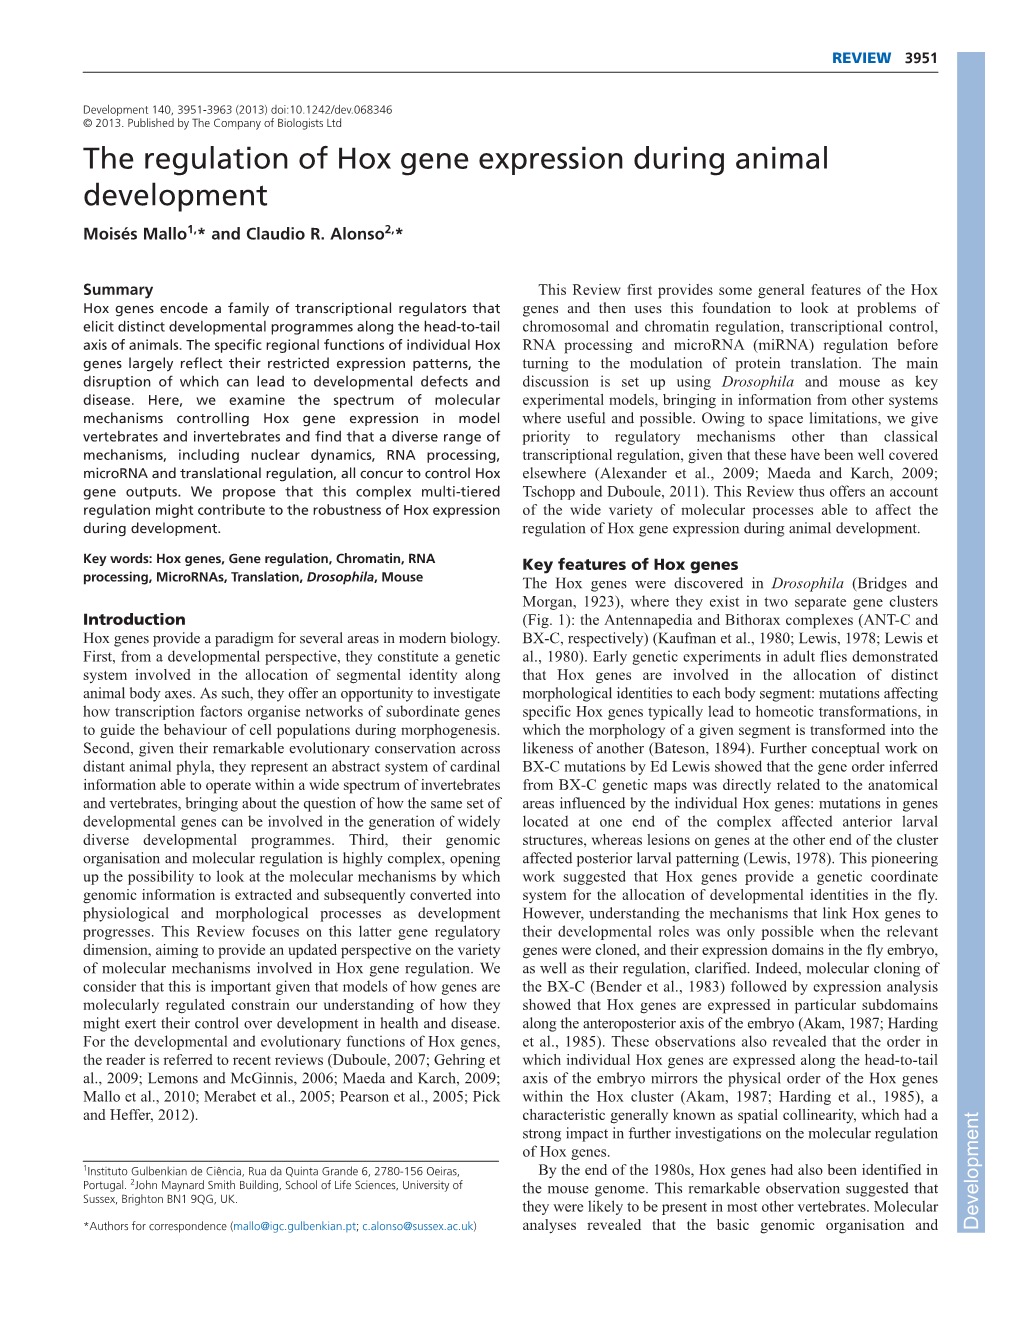 The Regulation of Hox Gene Expression During Animal Development Moisés Mallo1,* and Claudio R